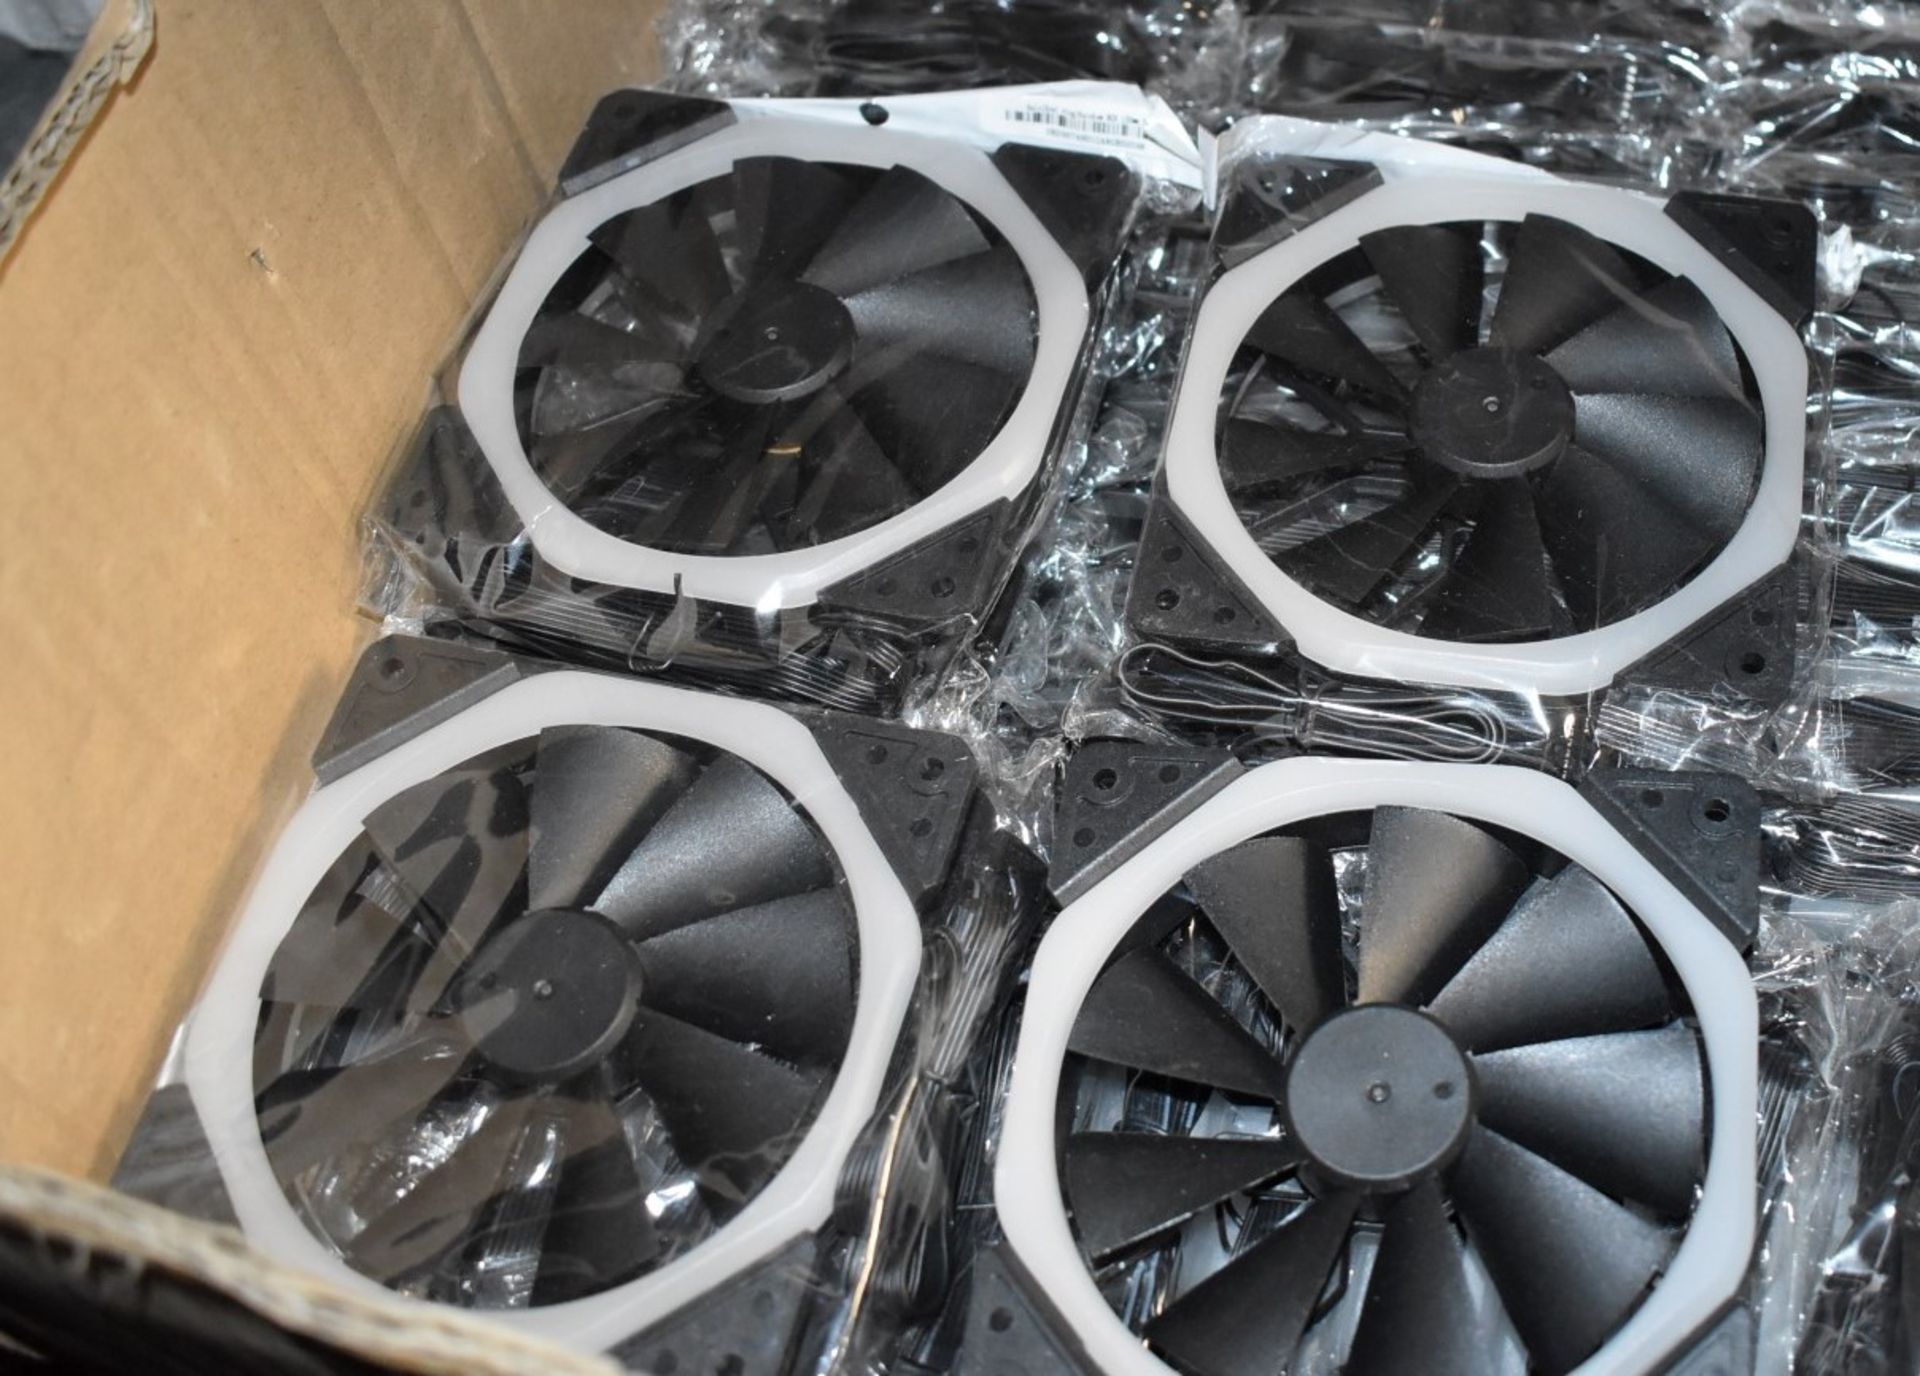 6 x Halo PC Gaming Case 120mm Cooling Fans - Dual-Ring, RGB LED, Hydro Bearing, 9 Blade Fan - Image 2 of 5